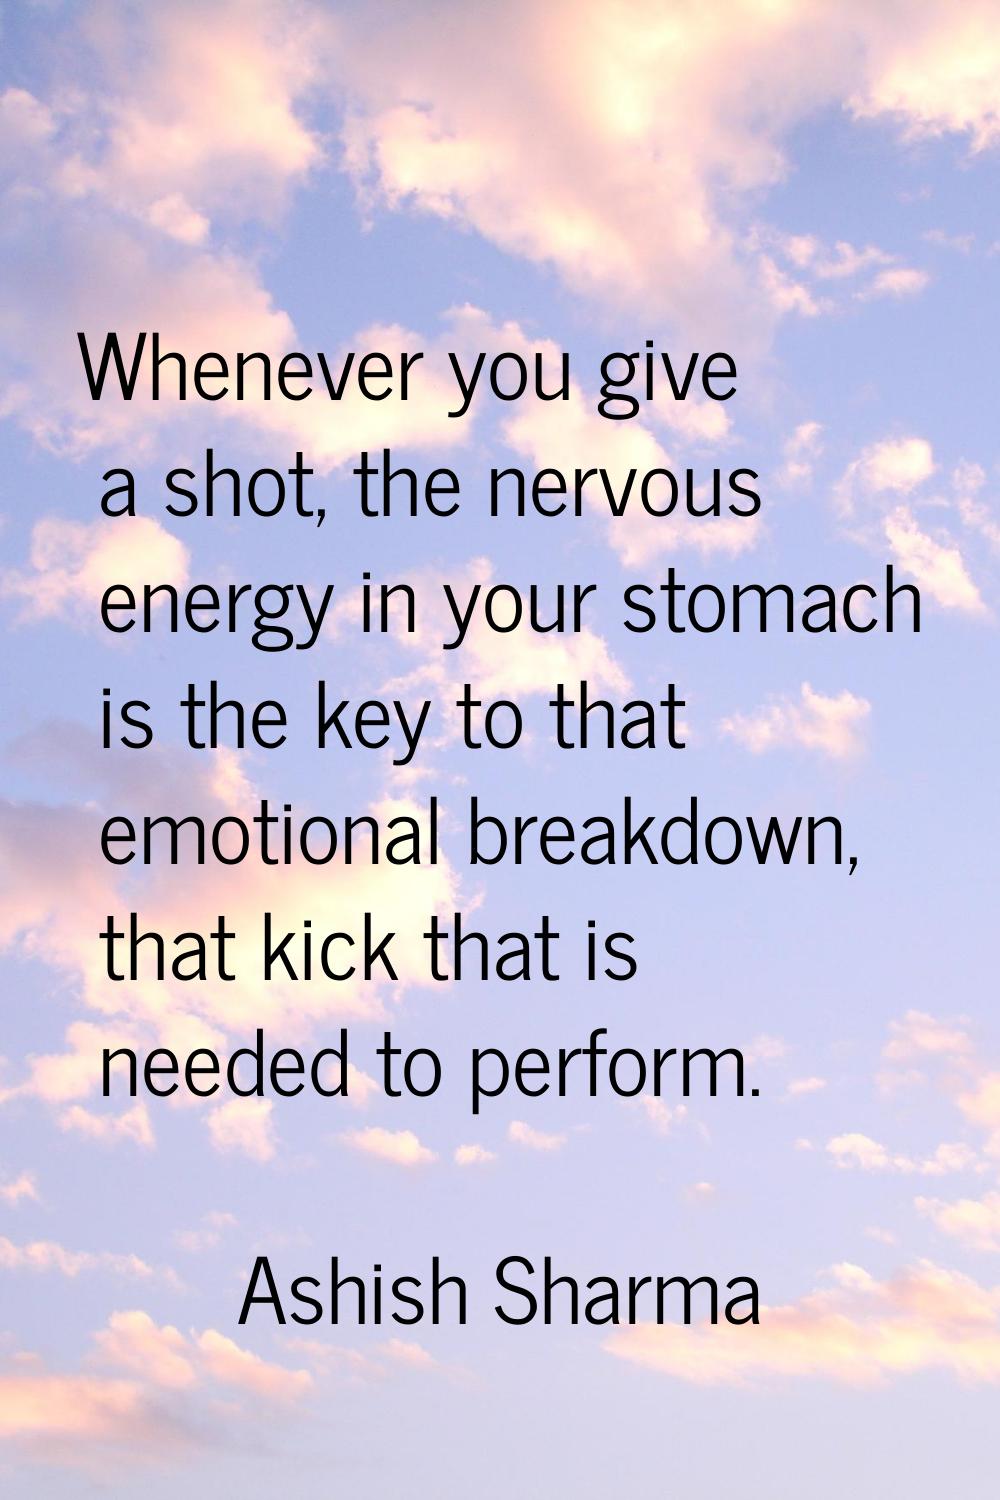 Whenever you give a shot, the nervous energy in your stomach is the key to that emotional breakdown